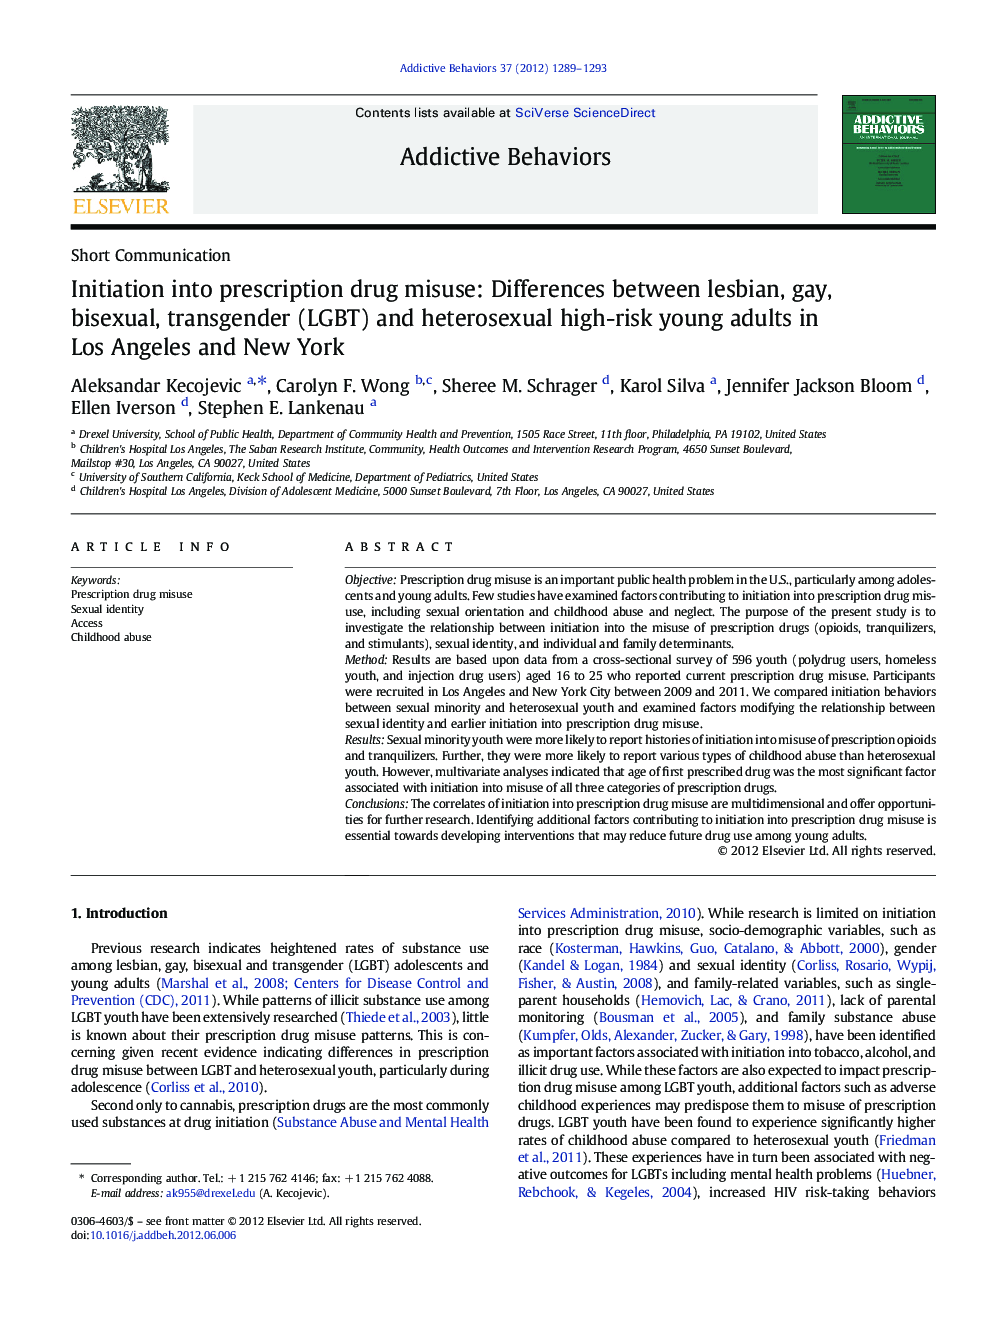 Initiation into prescription drug misuse: Differences between lesbian, gay, bisexual, transgender (LGBT) and heterosexual high-risk young adults in Los Angeles and New York